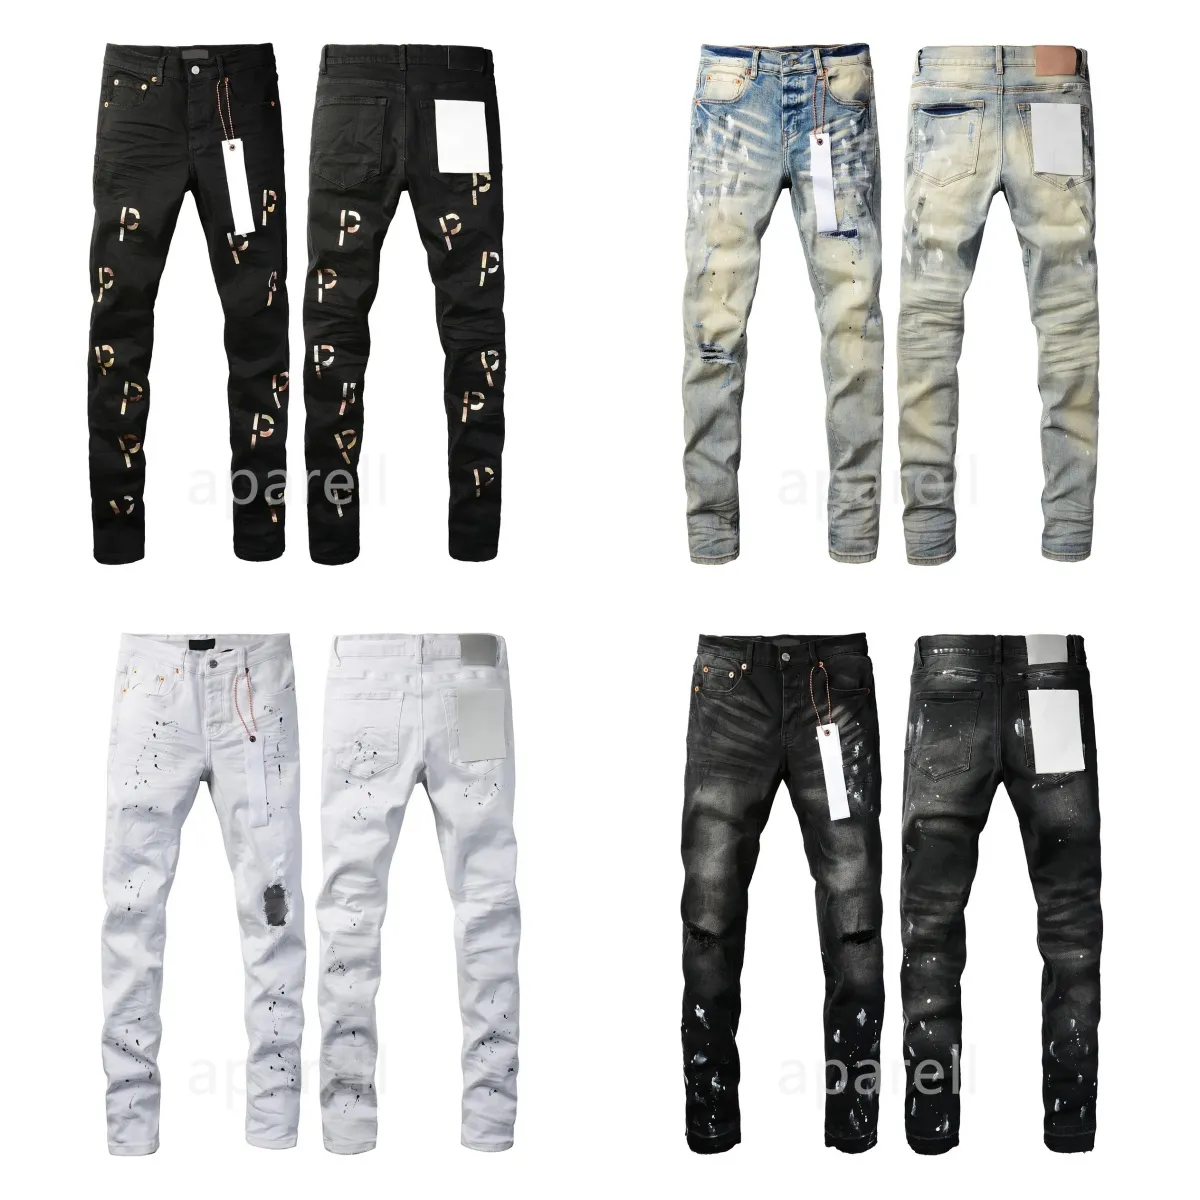 designer jeans purple jeans denim pants Fashion womens Elastic Skinny Ripped Jeans Buttons Fly Hip Hop Brand jeans for women White black pants